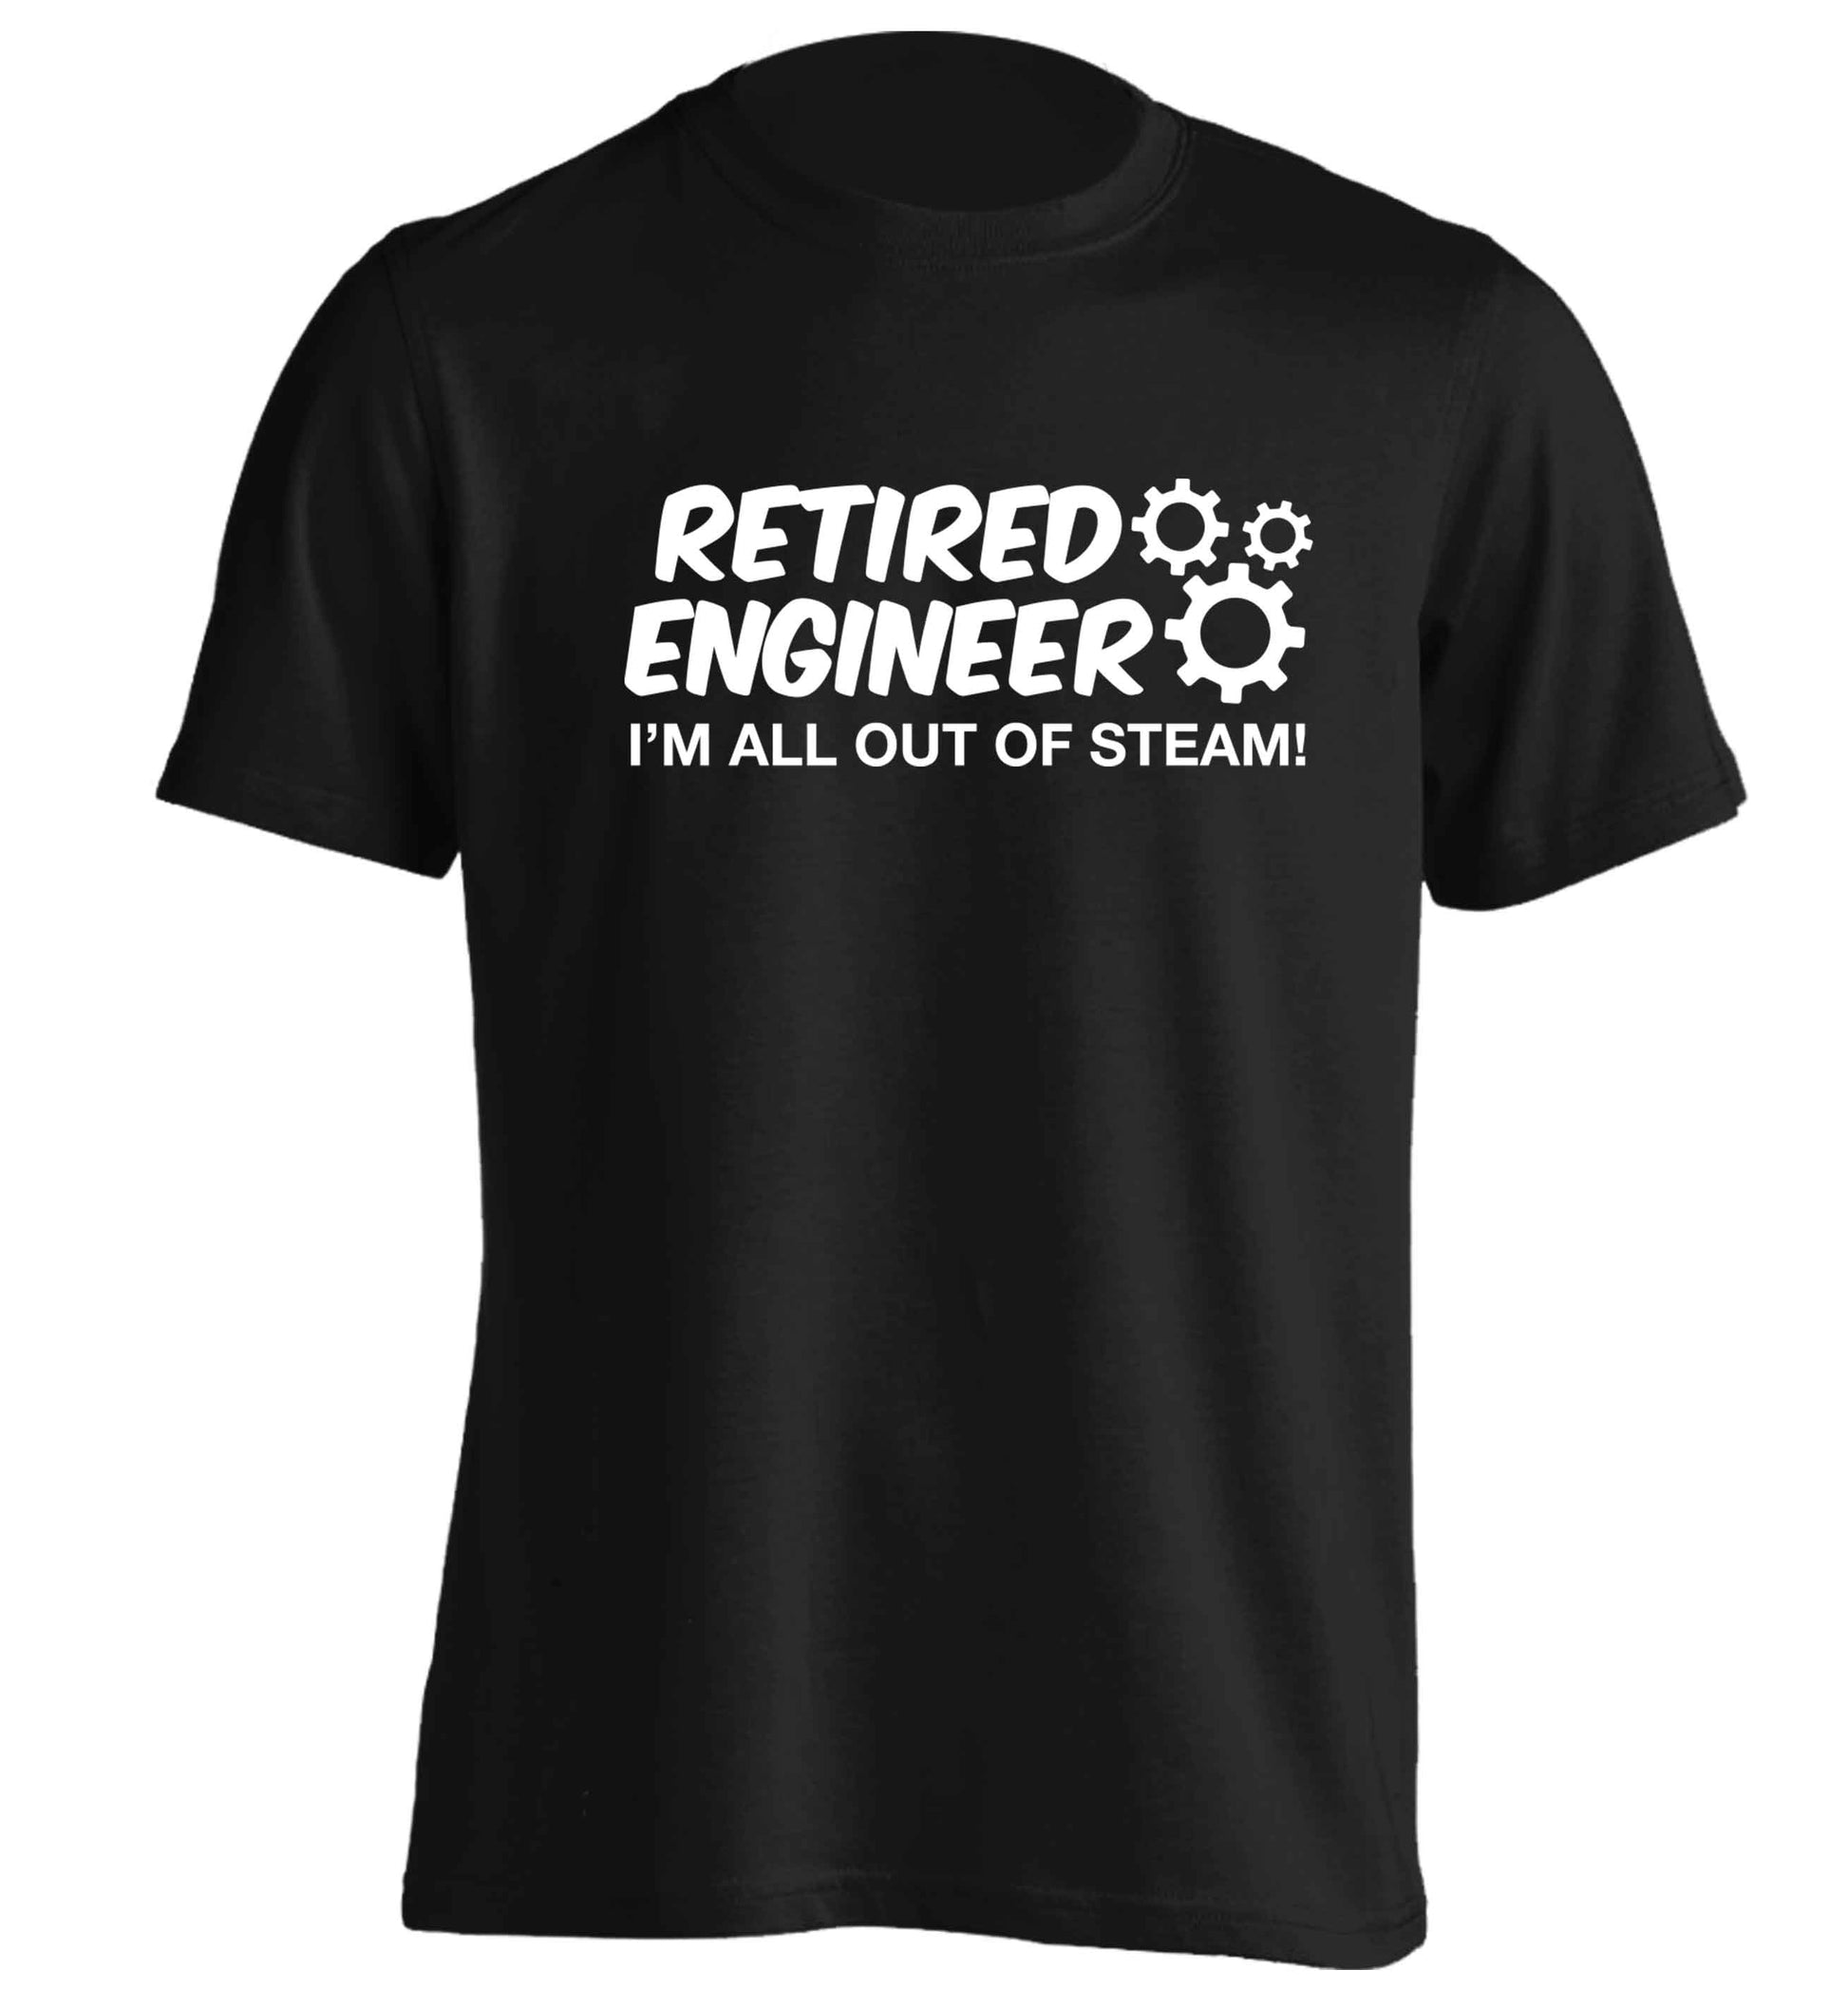 Retired engineer I'm all out of steam adults unisex black Tshirt 2XL